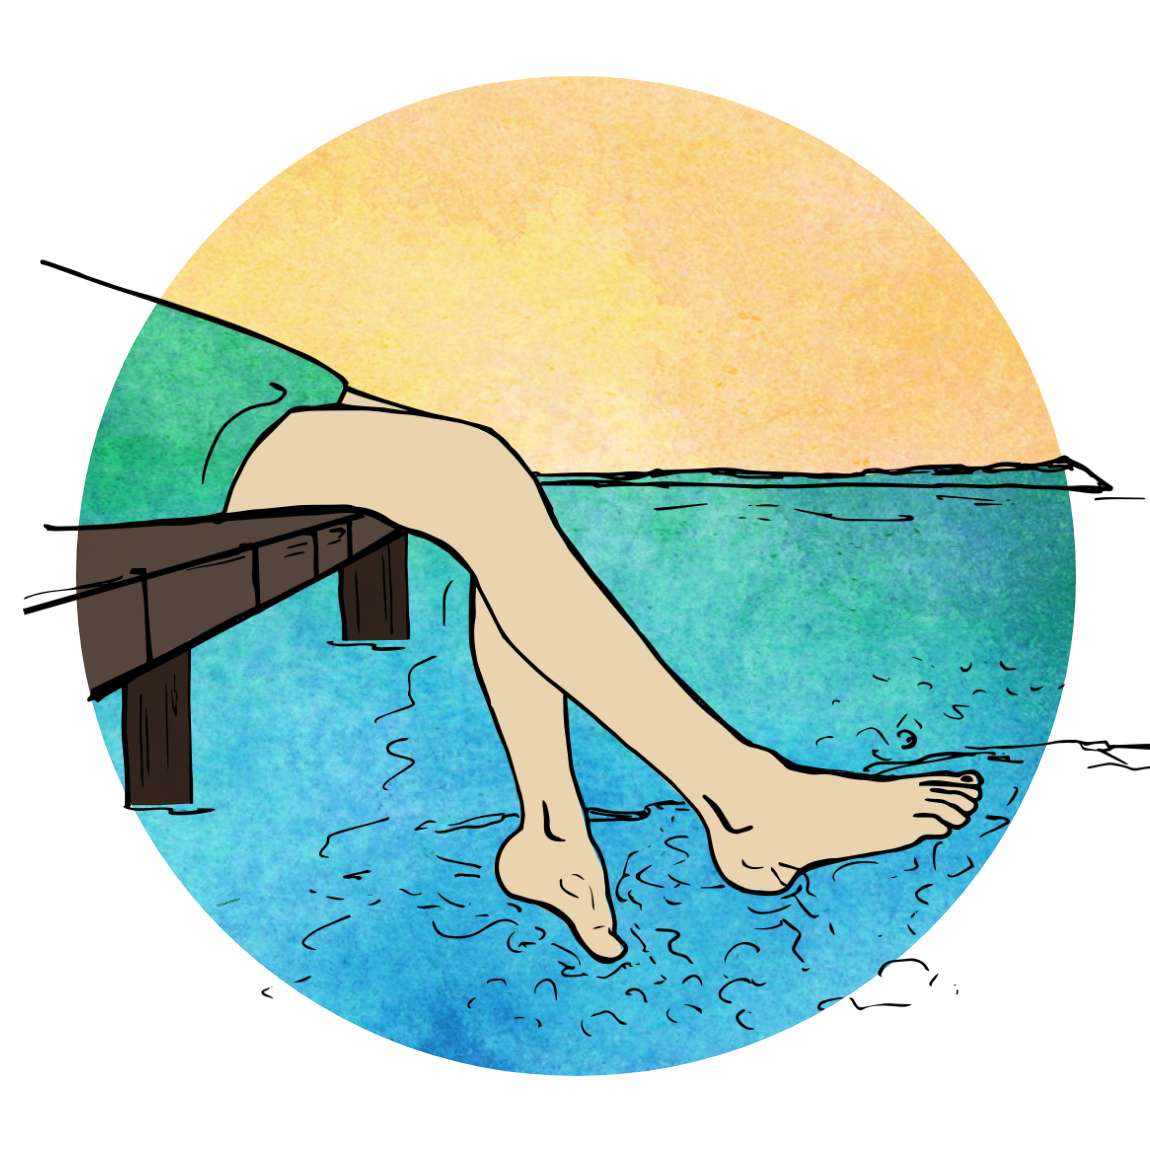 An illustration of two legs with bare dangling from the edge of a pier, playfully splashing in the blue water against a background of pale orange.